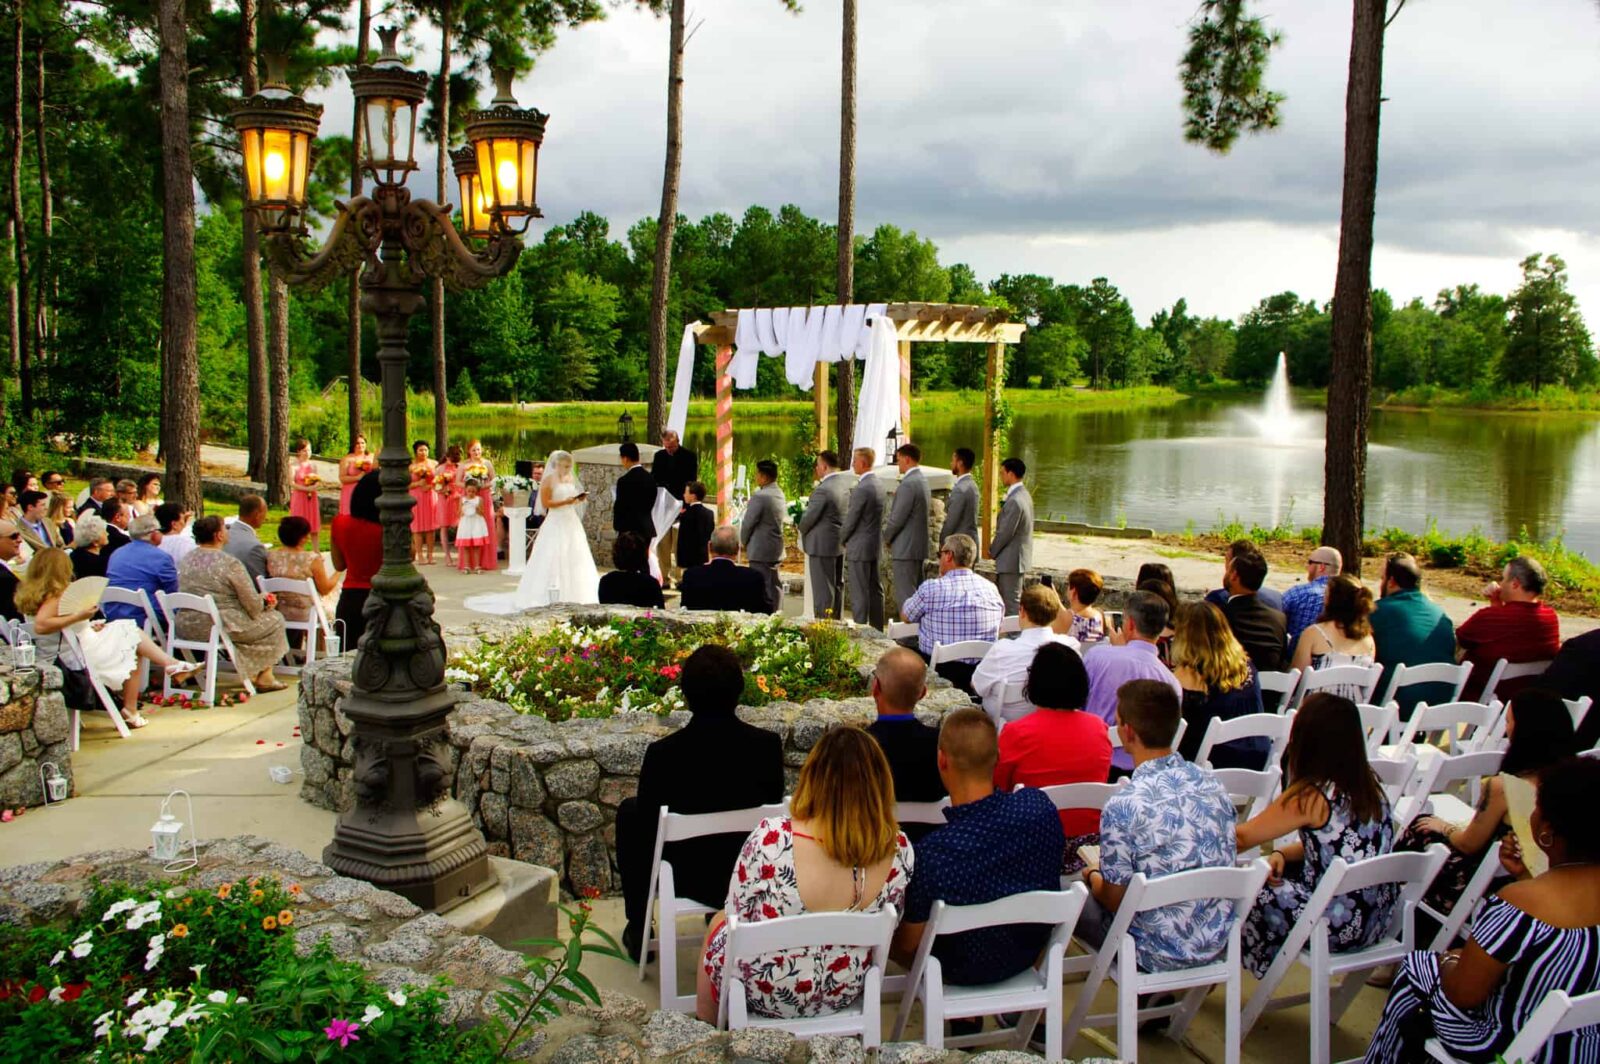 A group of people sitting in chairs at an outdoor wedding.